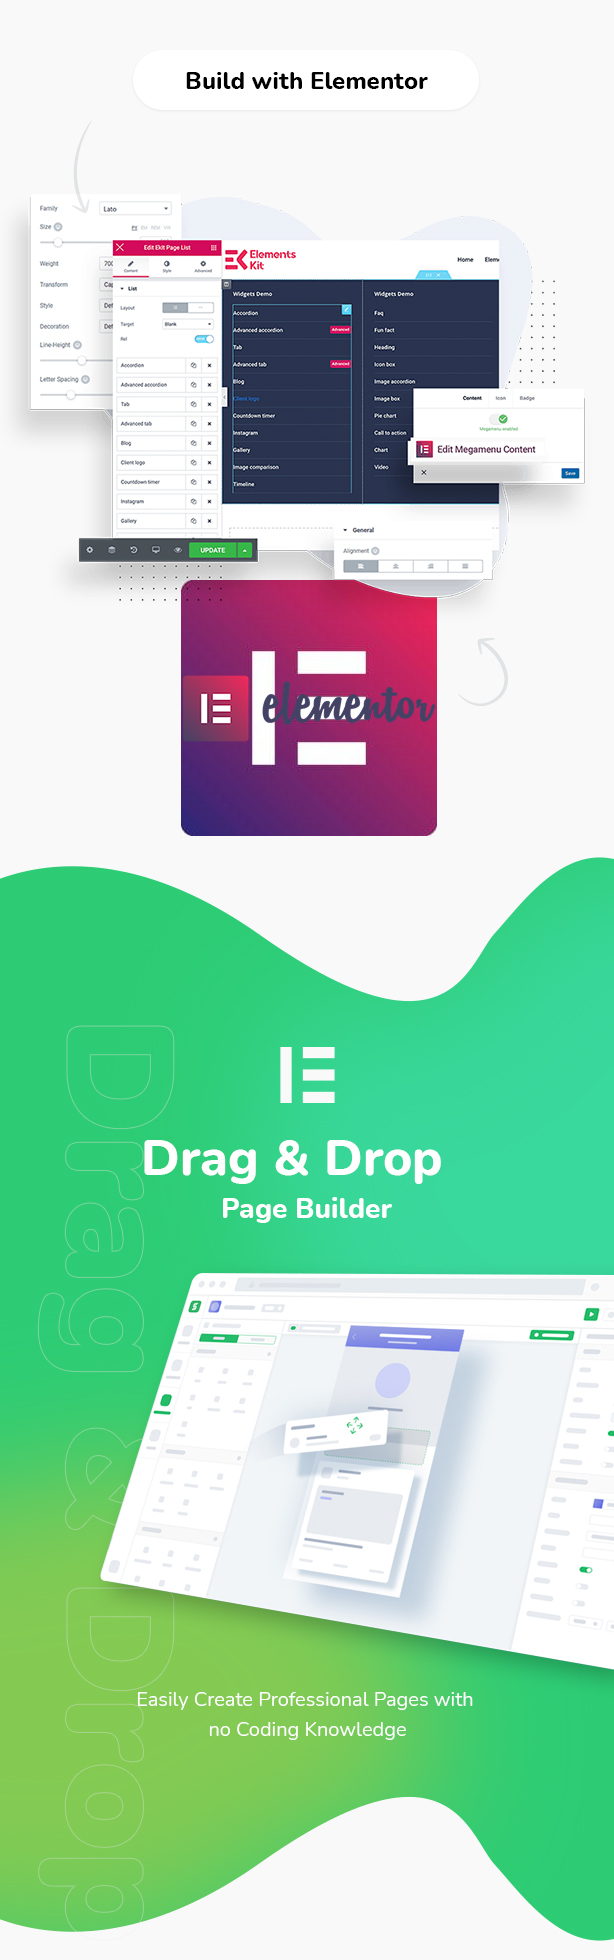 Education WordPress Theme - Drag and drop page builder